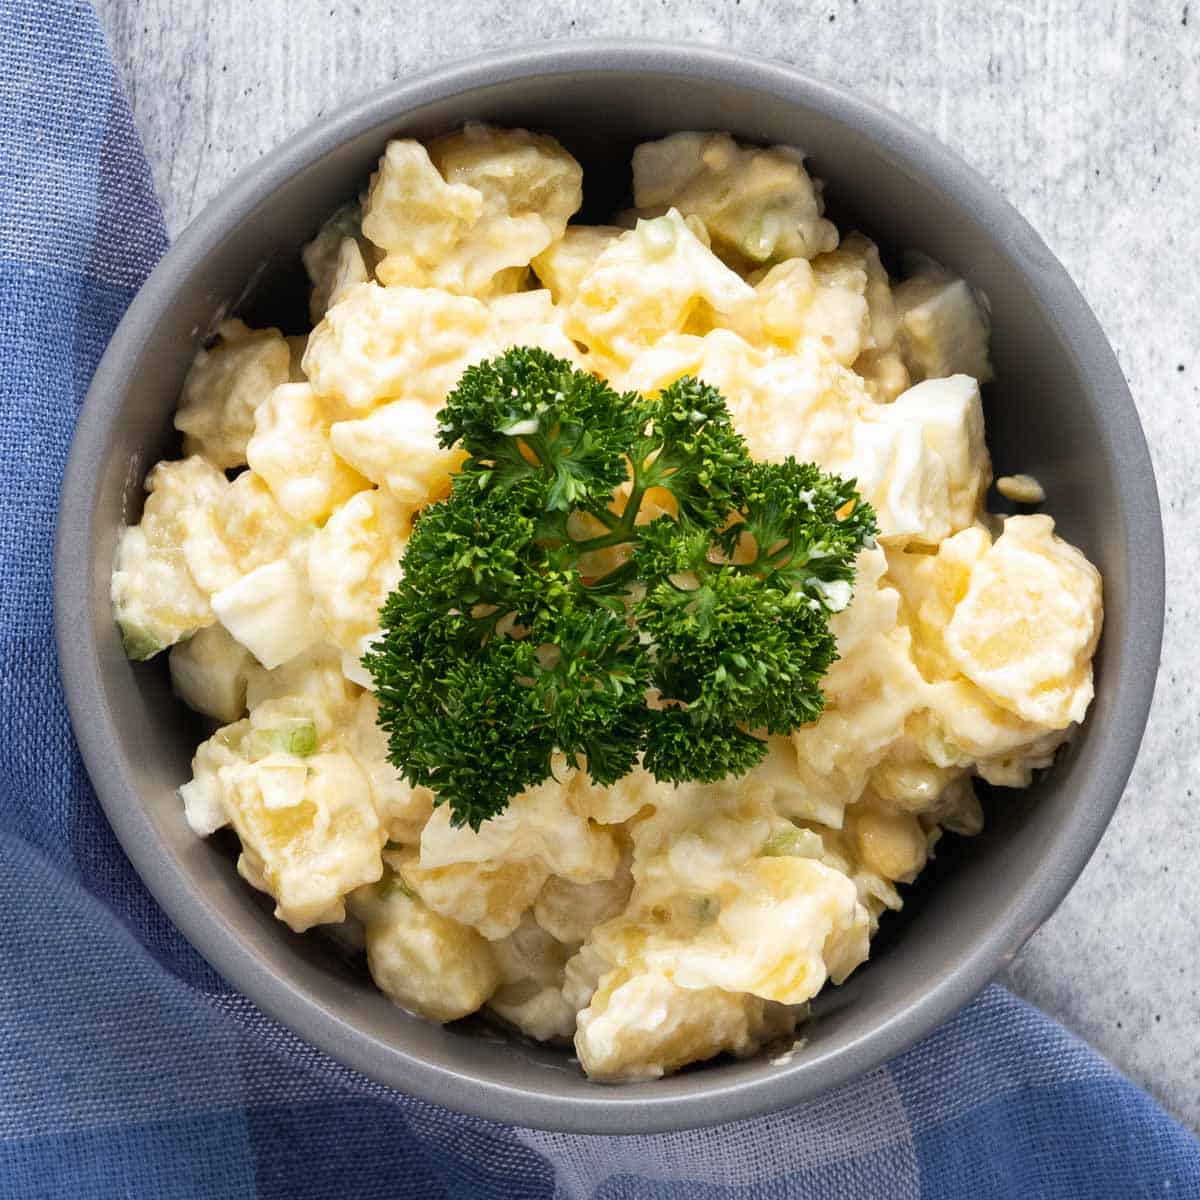 Top view of a bowl with potato salad decorated with curly parsley.